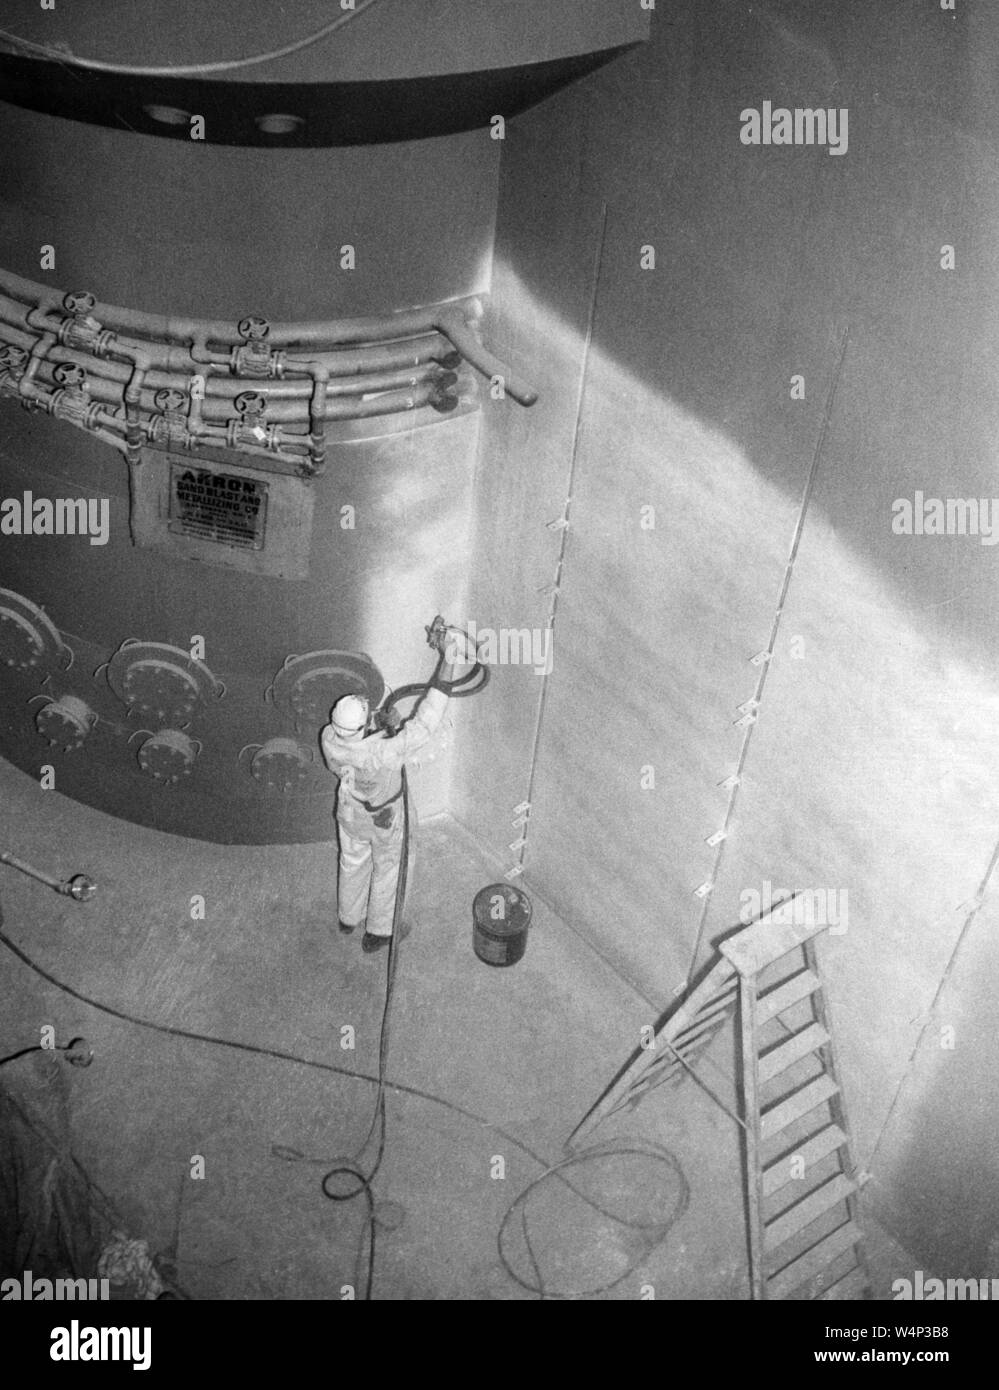 Worker spray paints one of the quadrant walls and a shielding wall surrounding the reactor pressure tank at the Plum Brook Station, John H. Glenn Research Center at Lewis Field, Cleveland, Ohio, 2003. Image courtesy National Aeronautics and Space Administration (NASA). () Stock Photo